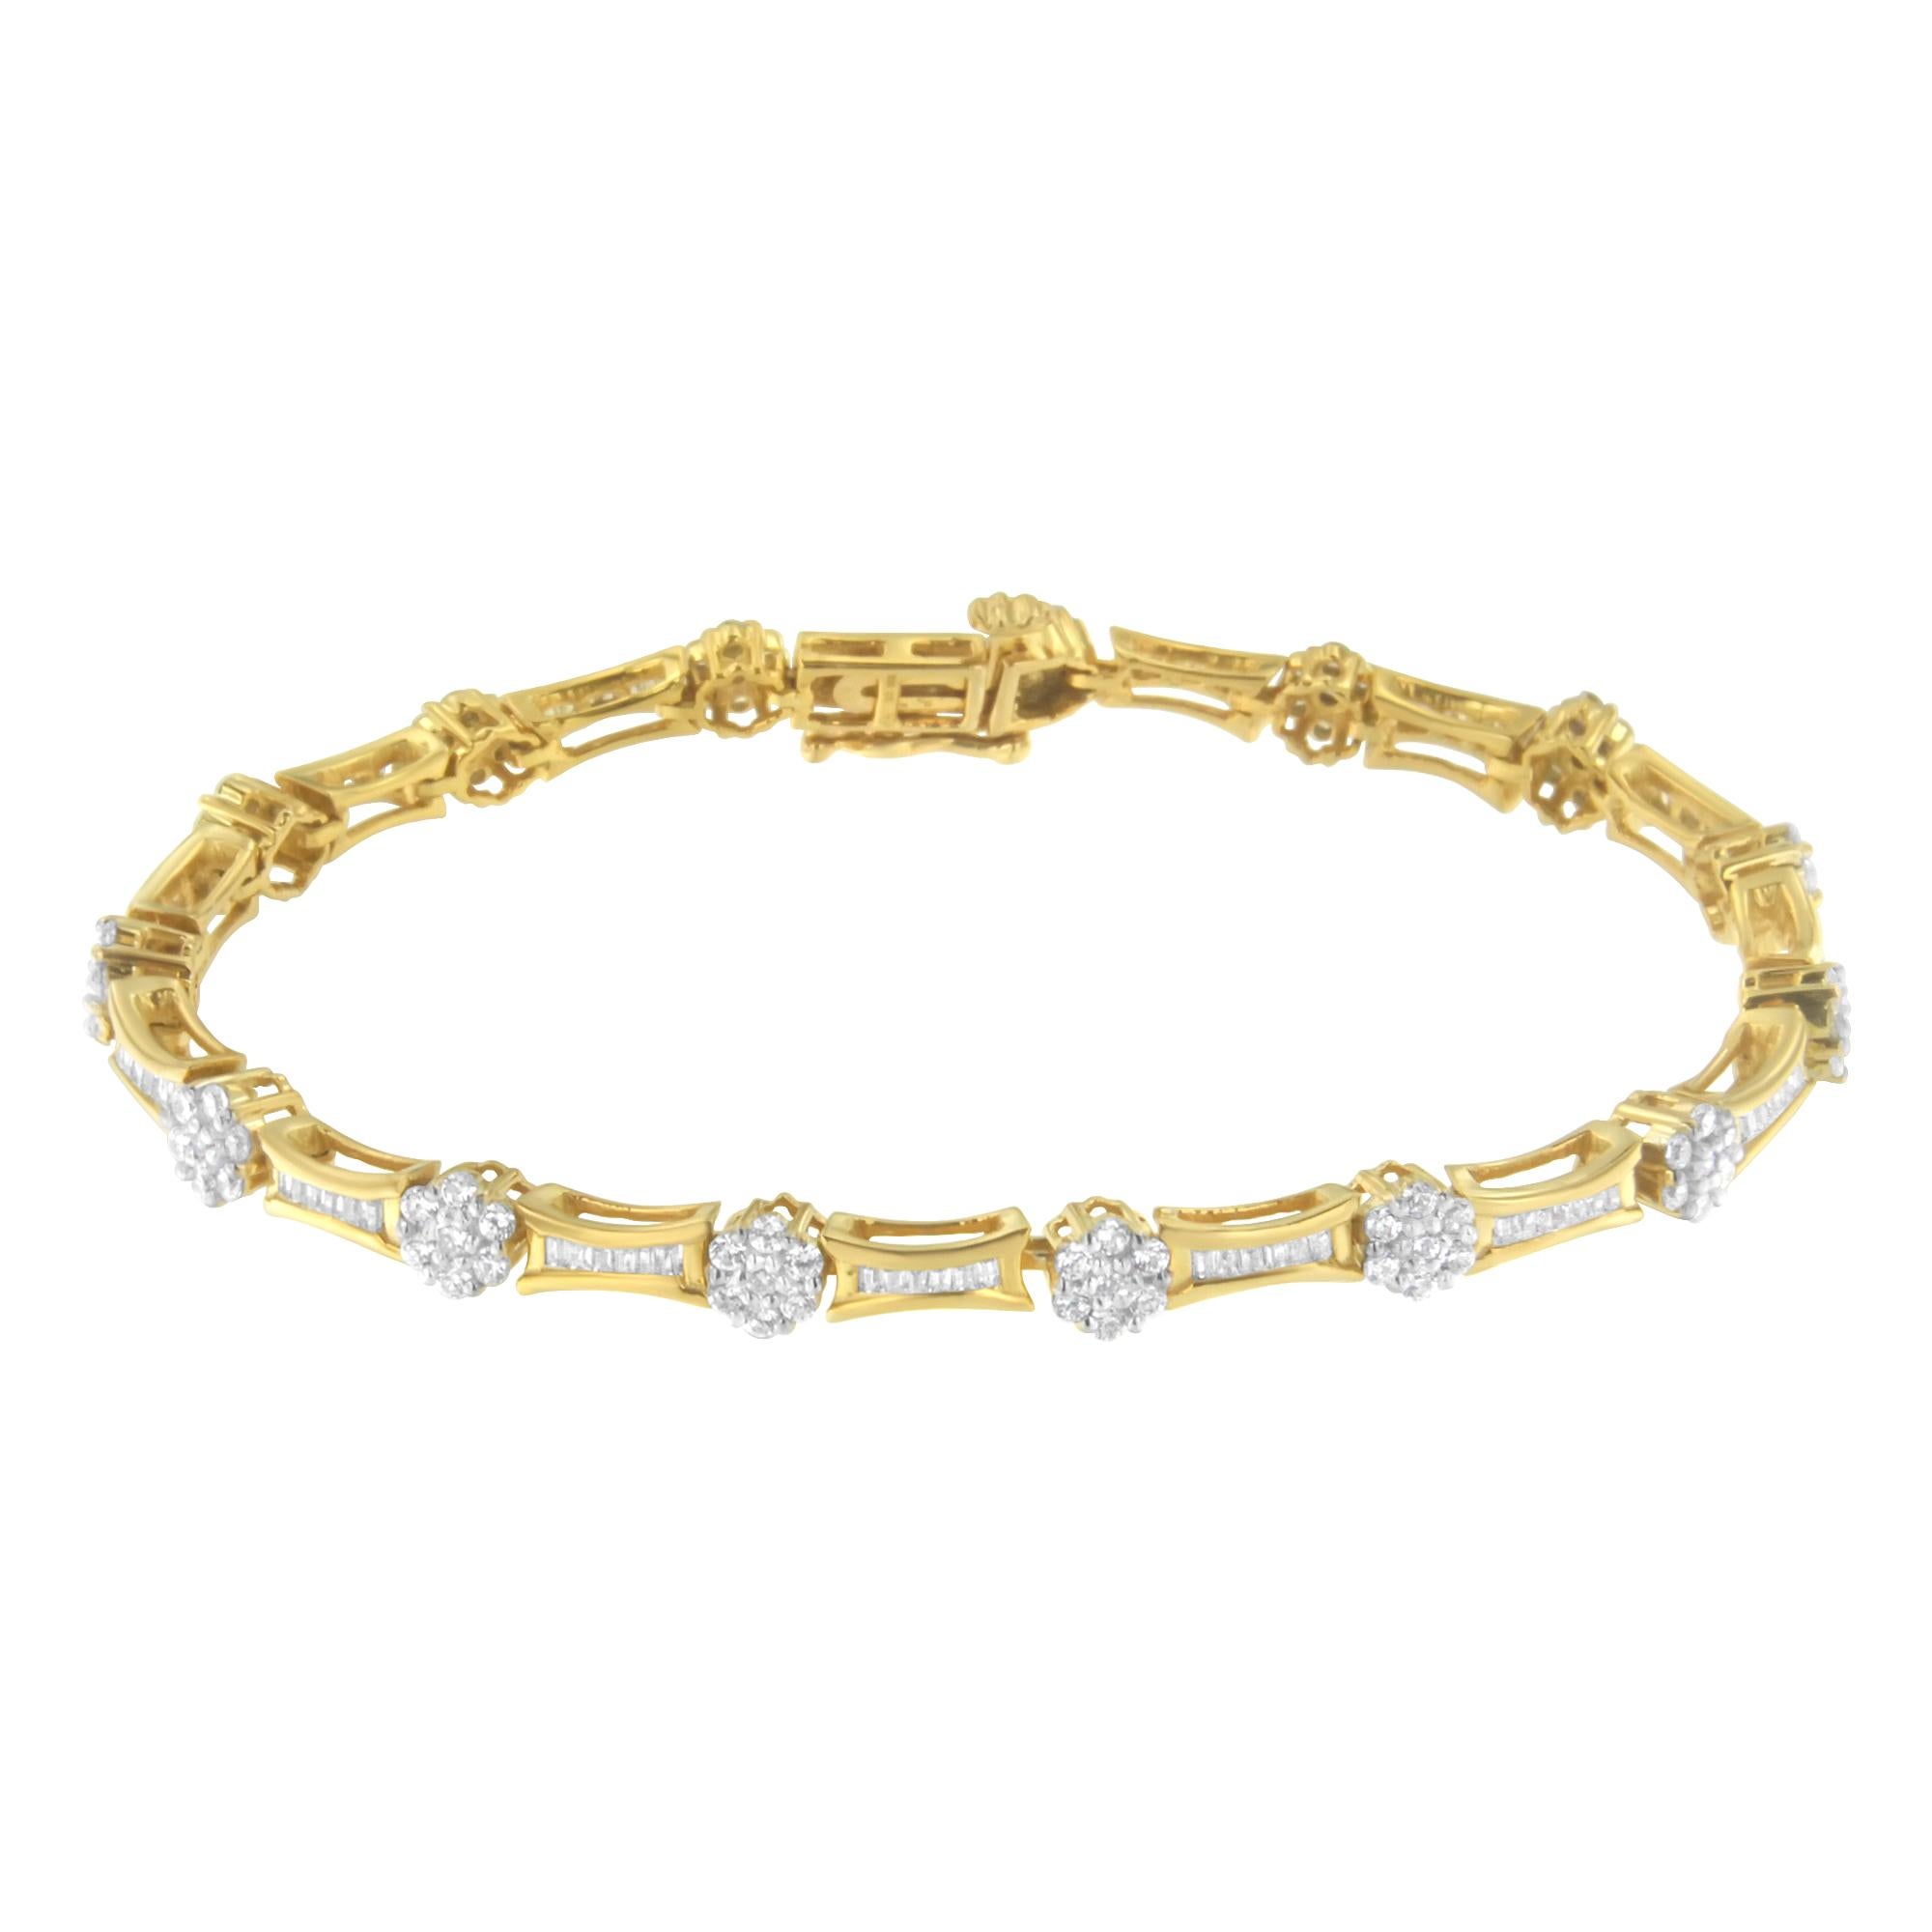 The shimmering round cut diamond-embedded gold bracelet is the best gift for any occasion. Gift this to your special lady, be it you daughter, sister, wife, mother or girlfriend, on her special day and let her sparkle in joy. This elegant piece of